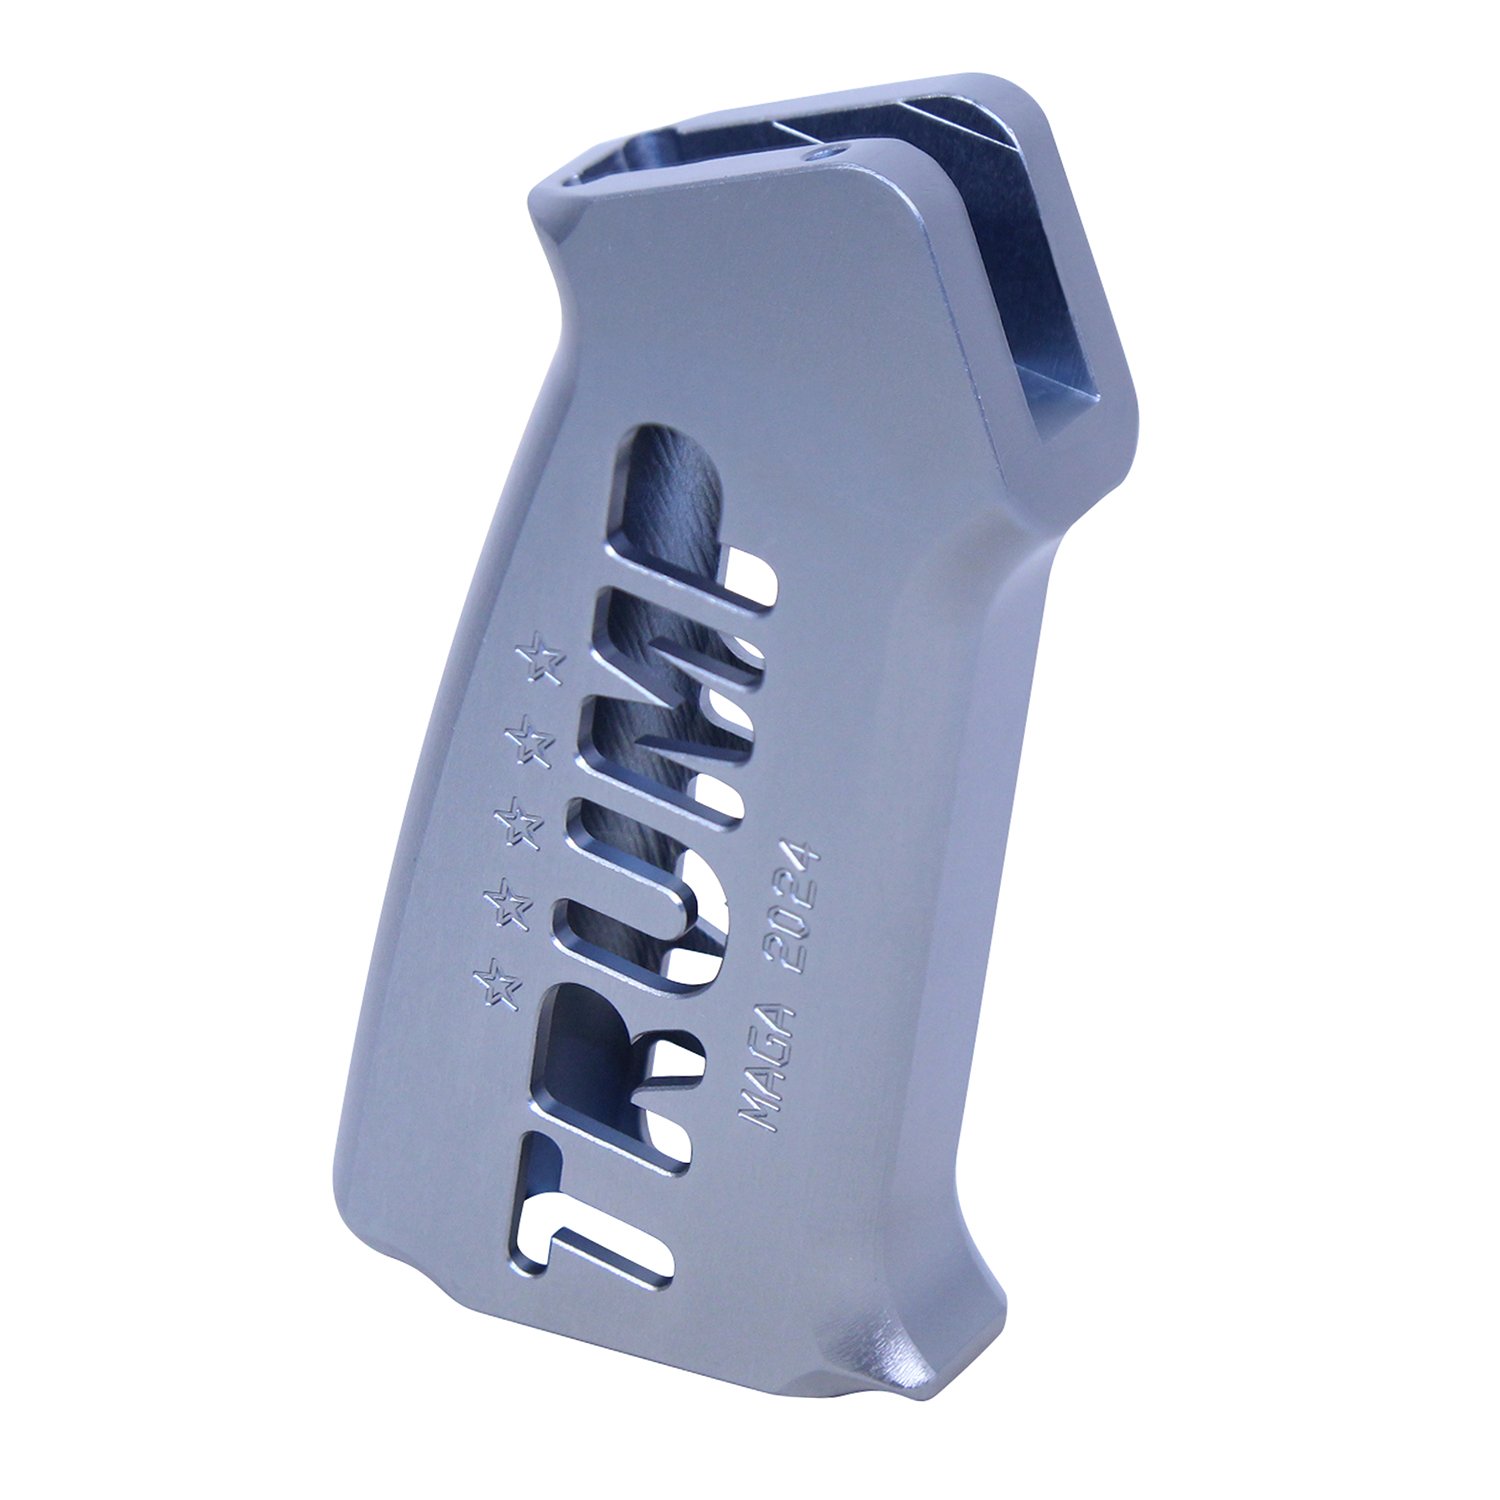 AR-15 "Trump Series" Limited Edition Pistol Grip in Anodized Grey